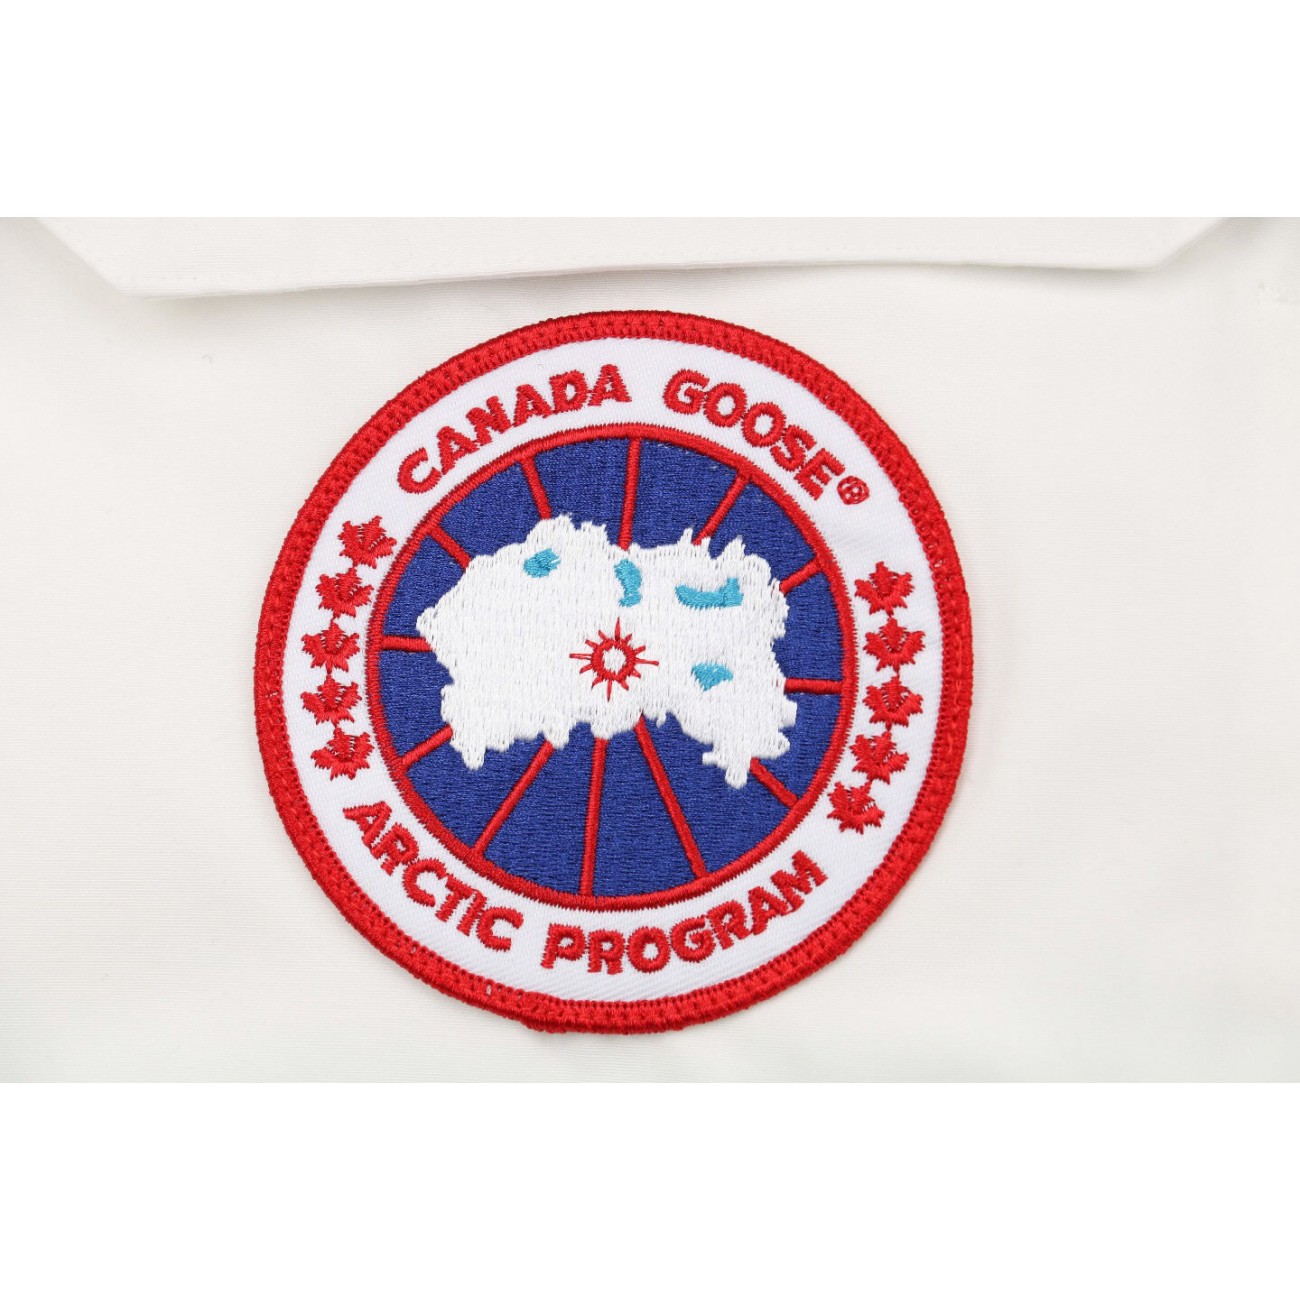 08 ' Canada Goose '19FW Expedition 4660MA Down Jacket Coat "White"